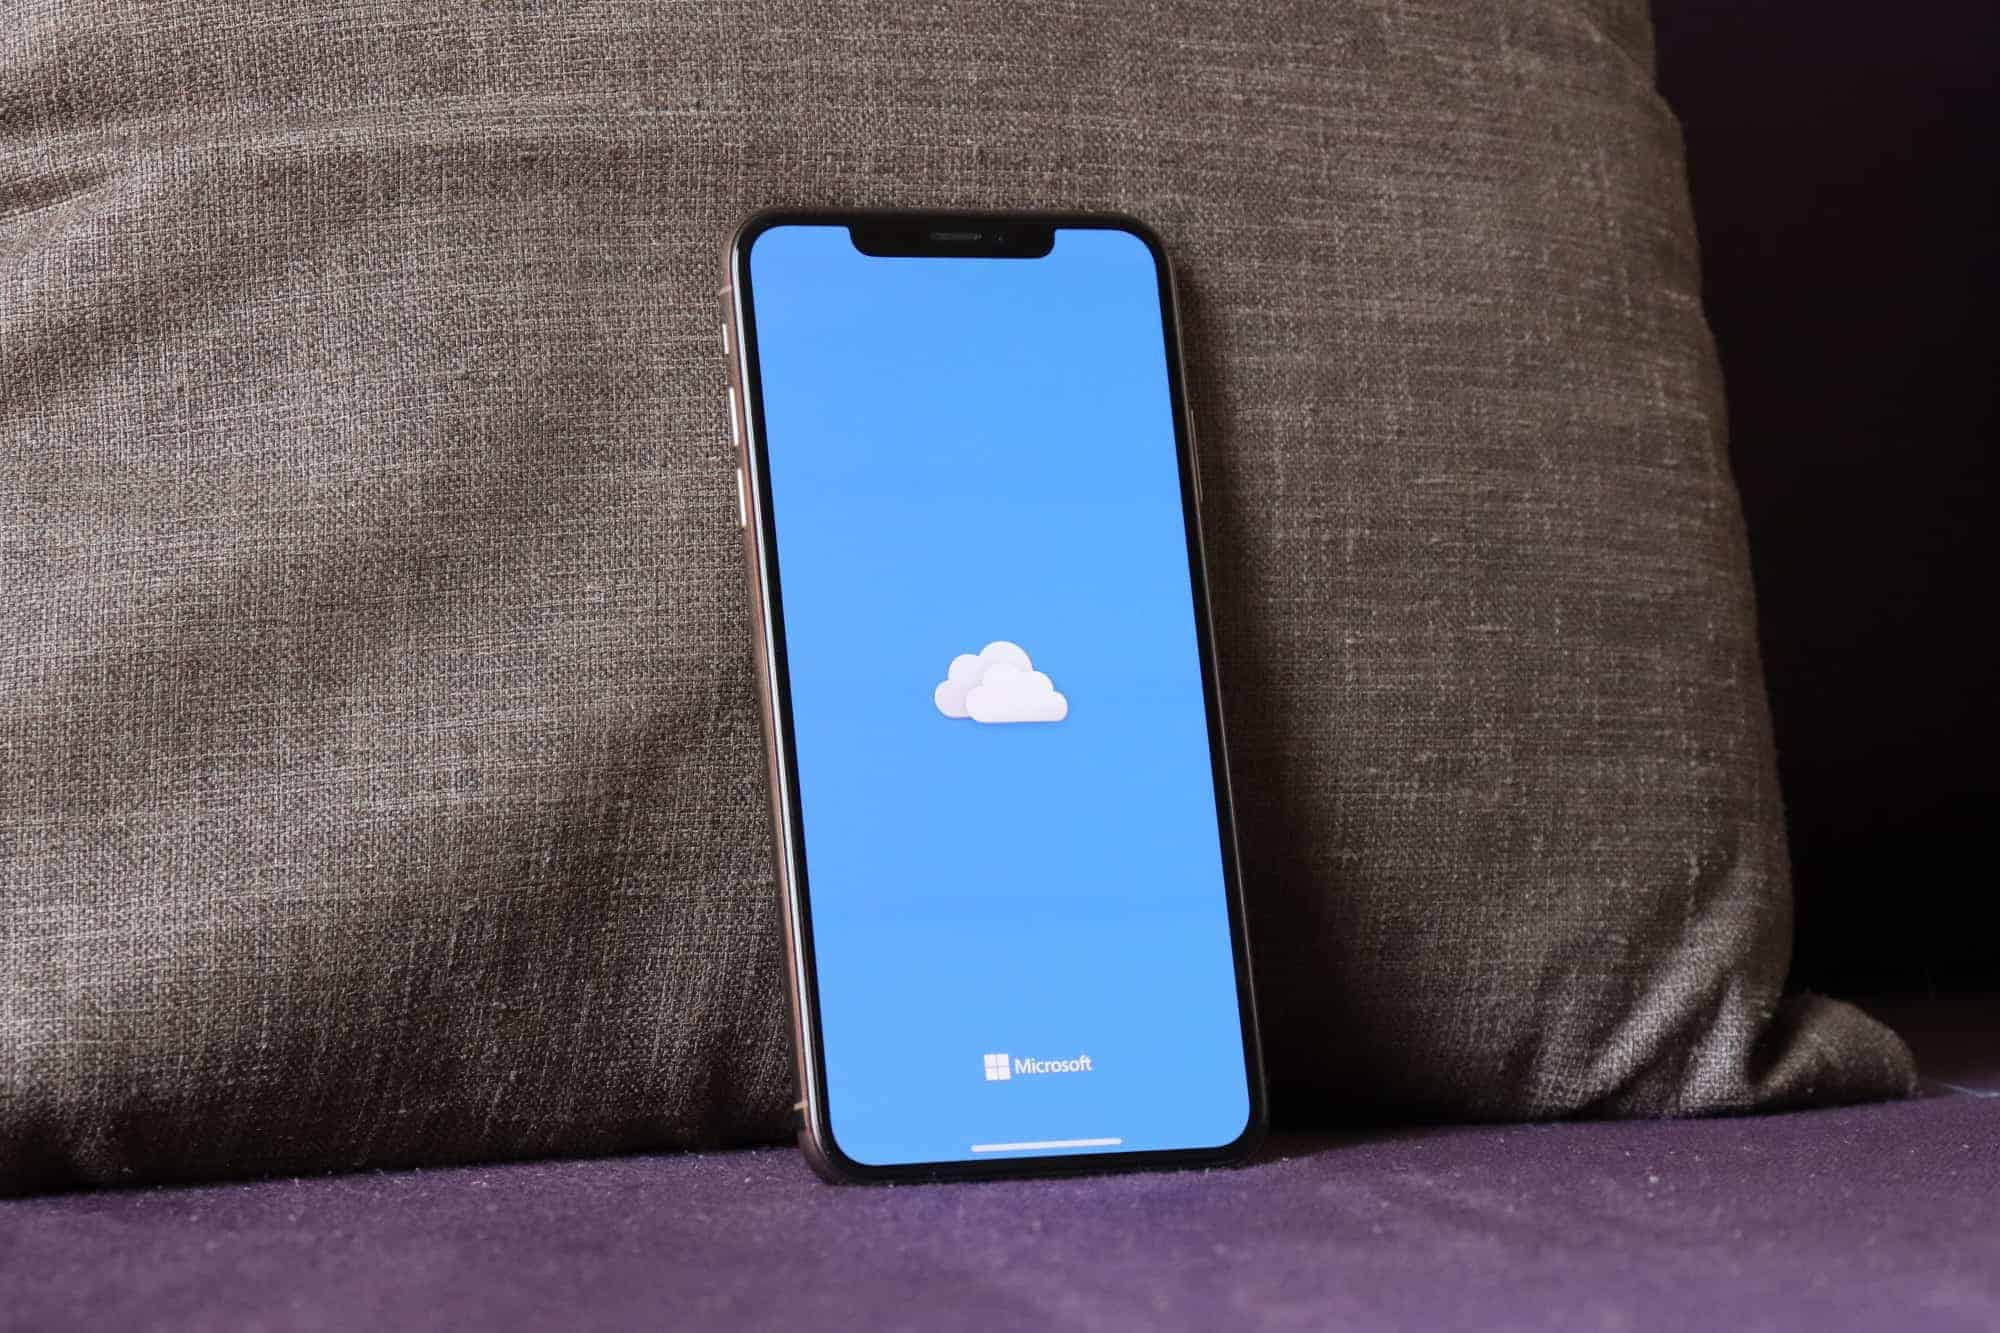 Microsoft OneDrive app now fully supports the big display on iPhone XS Max